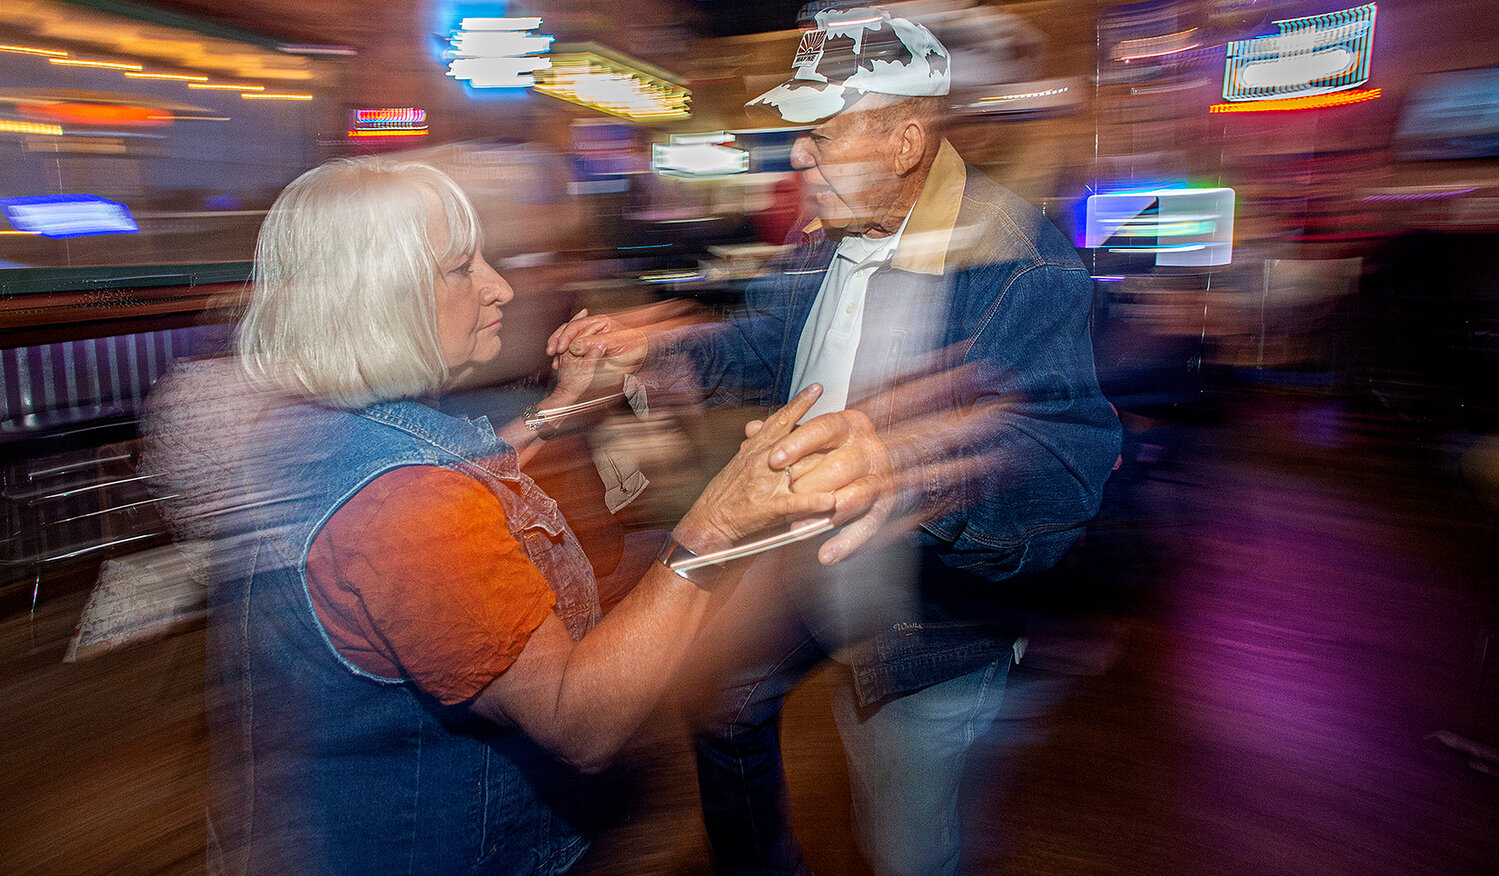 Judy Stone, 71, and her friend Andrew Andrews, 83, both from Joshus, Texas, hit the floor swinging.